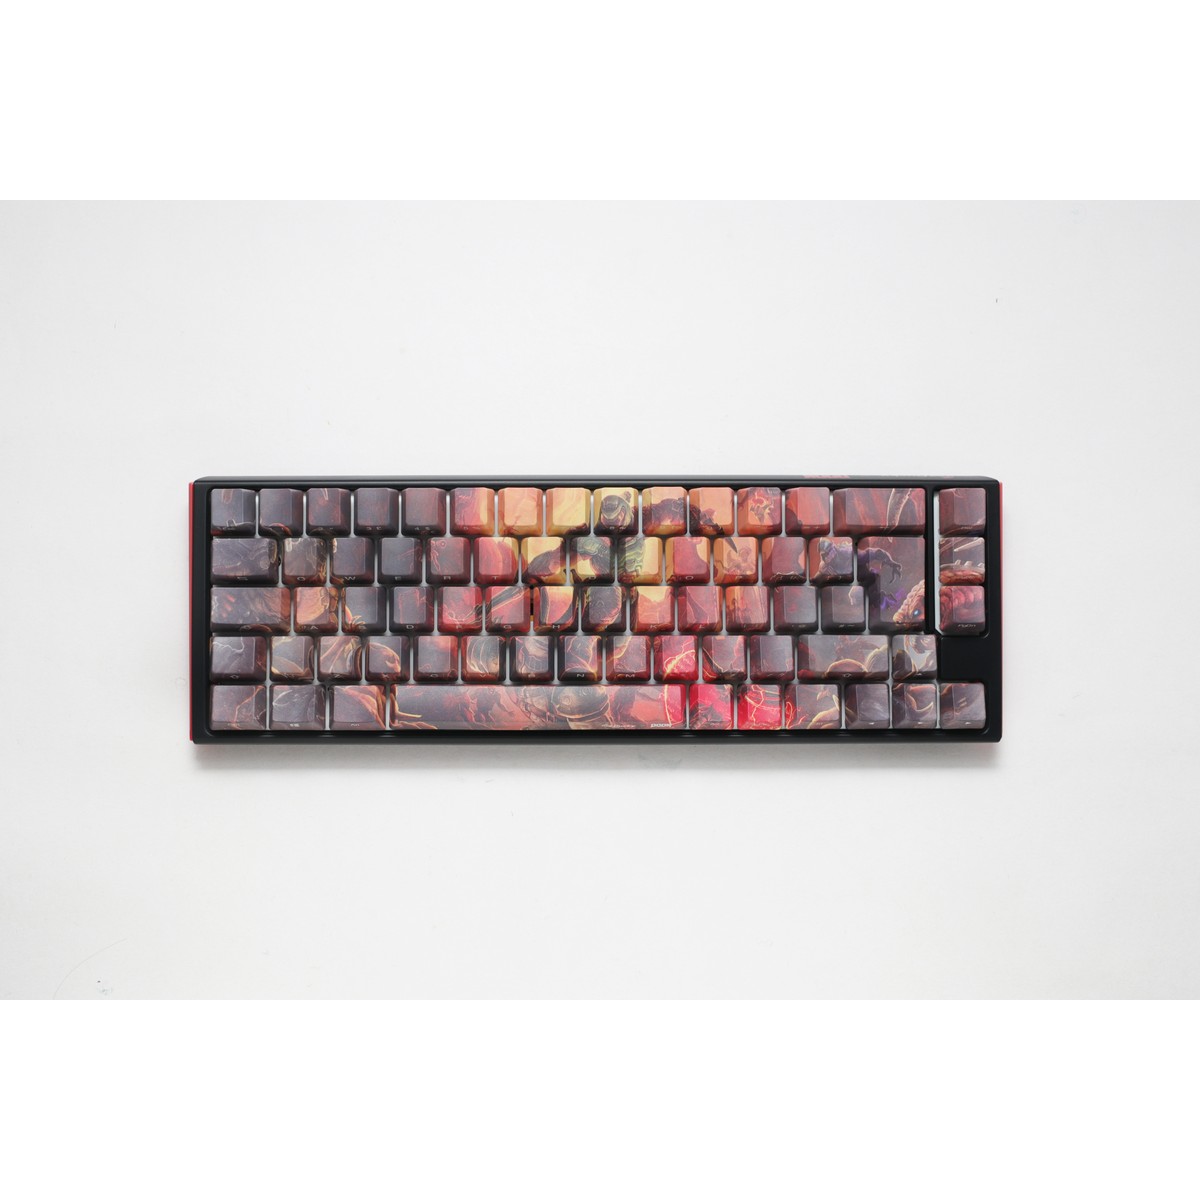 Ducky - Ducky x DOOM SF 65% Gaming Keyboard Limited Edition Cherry MX Red Switches UK La